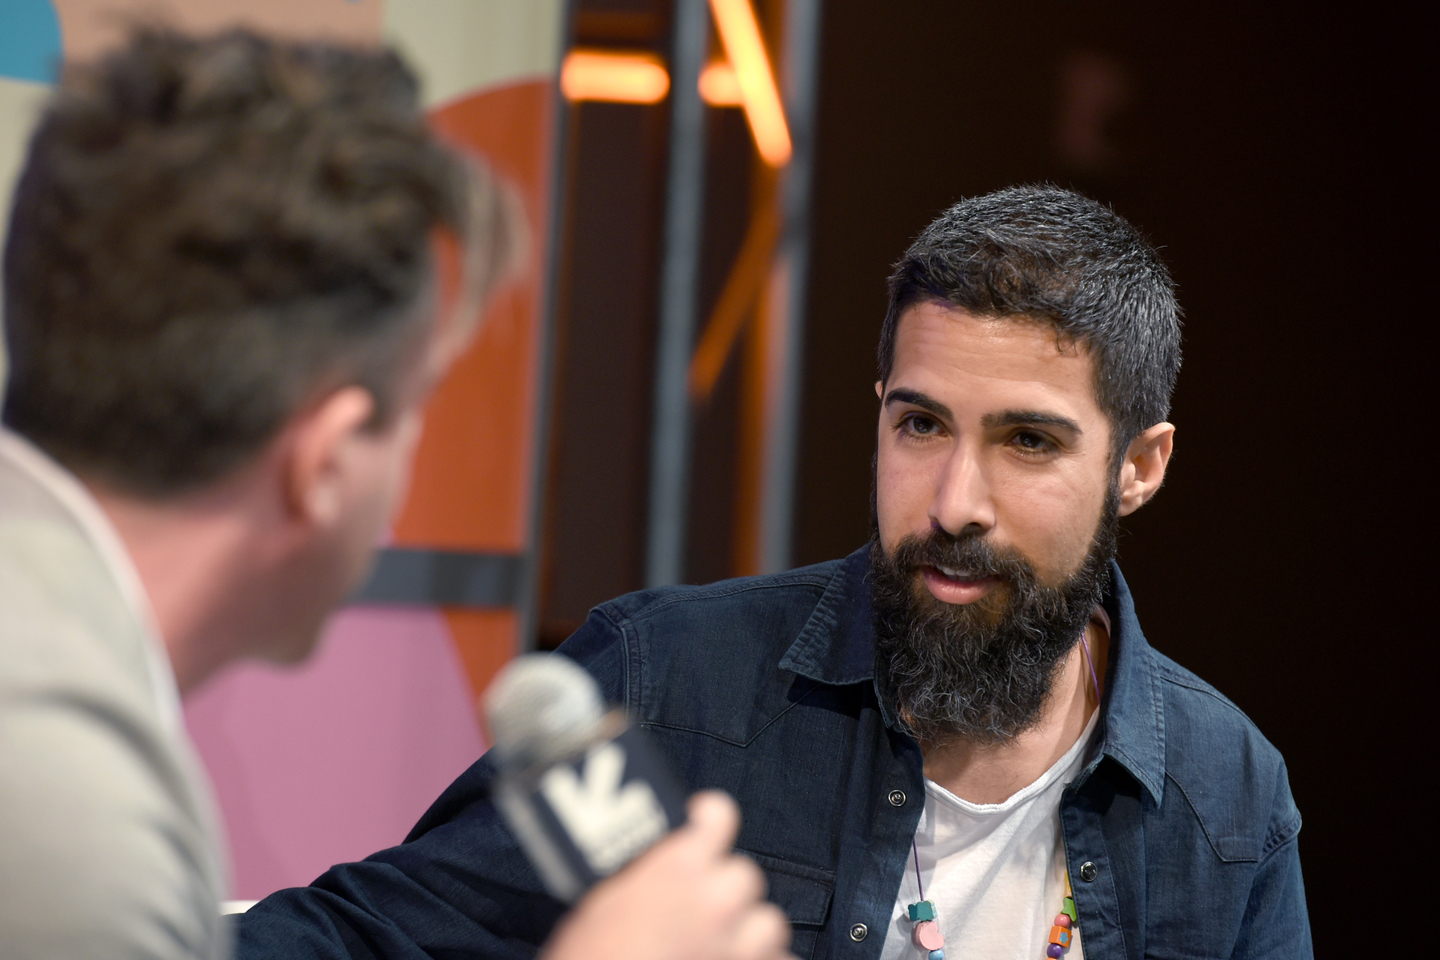 Pop hit songwriter Savan Kotecha was a Featured Speaker in the Music Culture & Stories track. Photo by Dave Pedley/Getty Images for SXSW